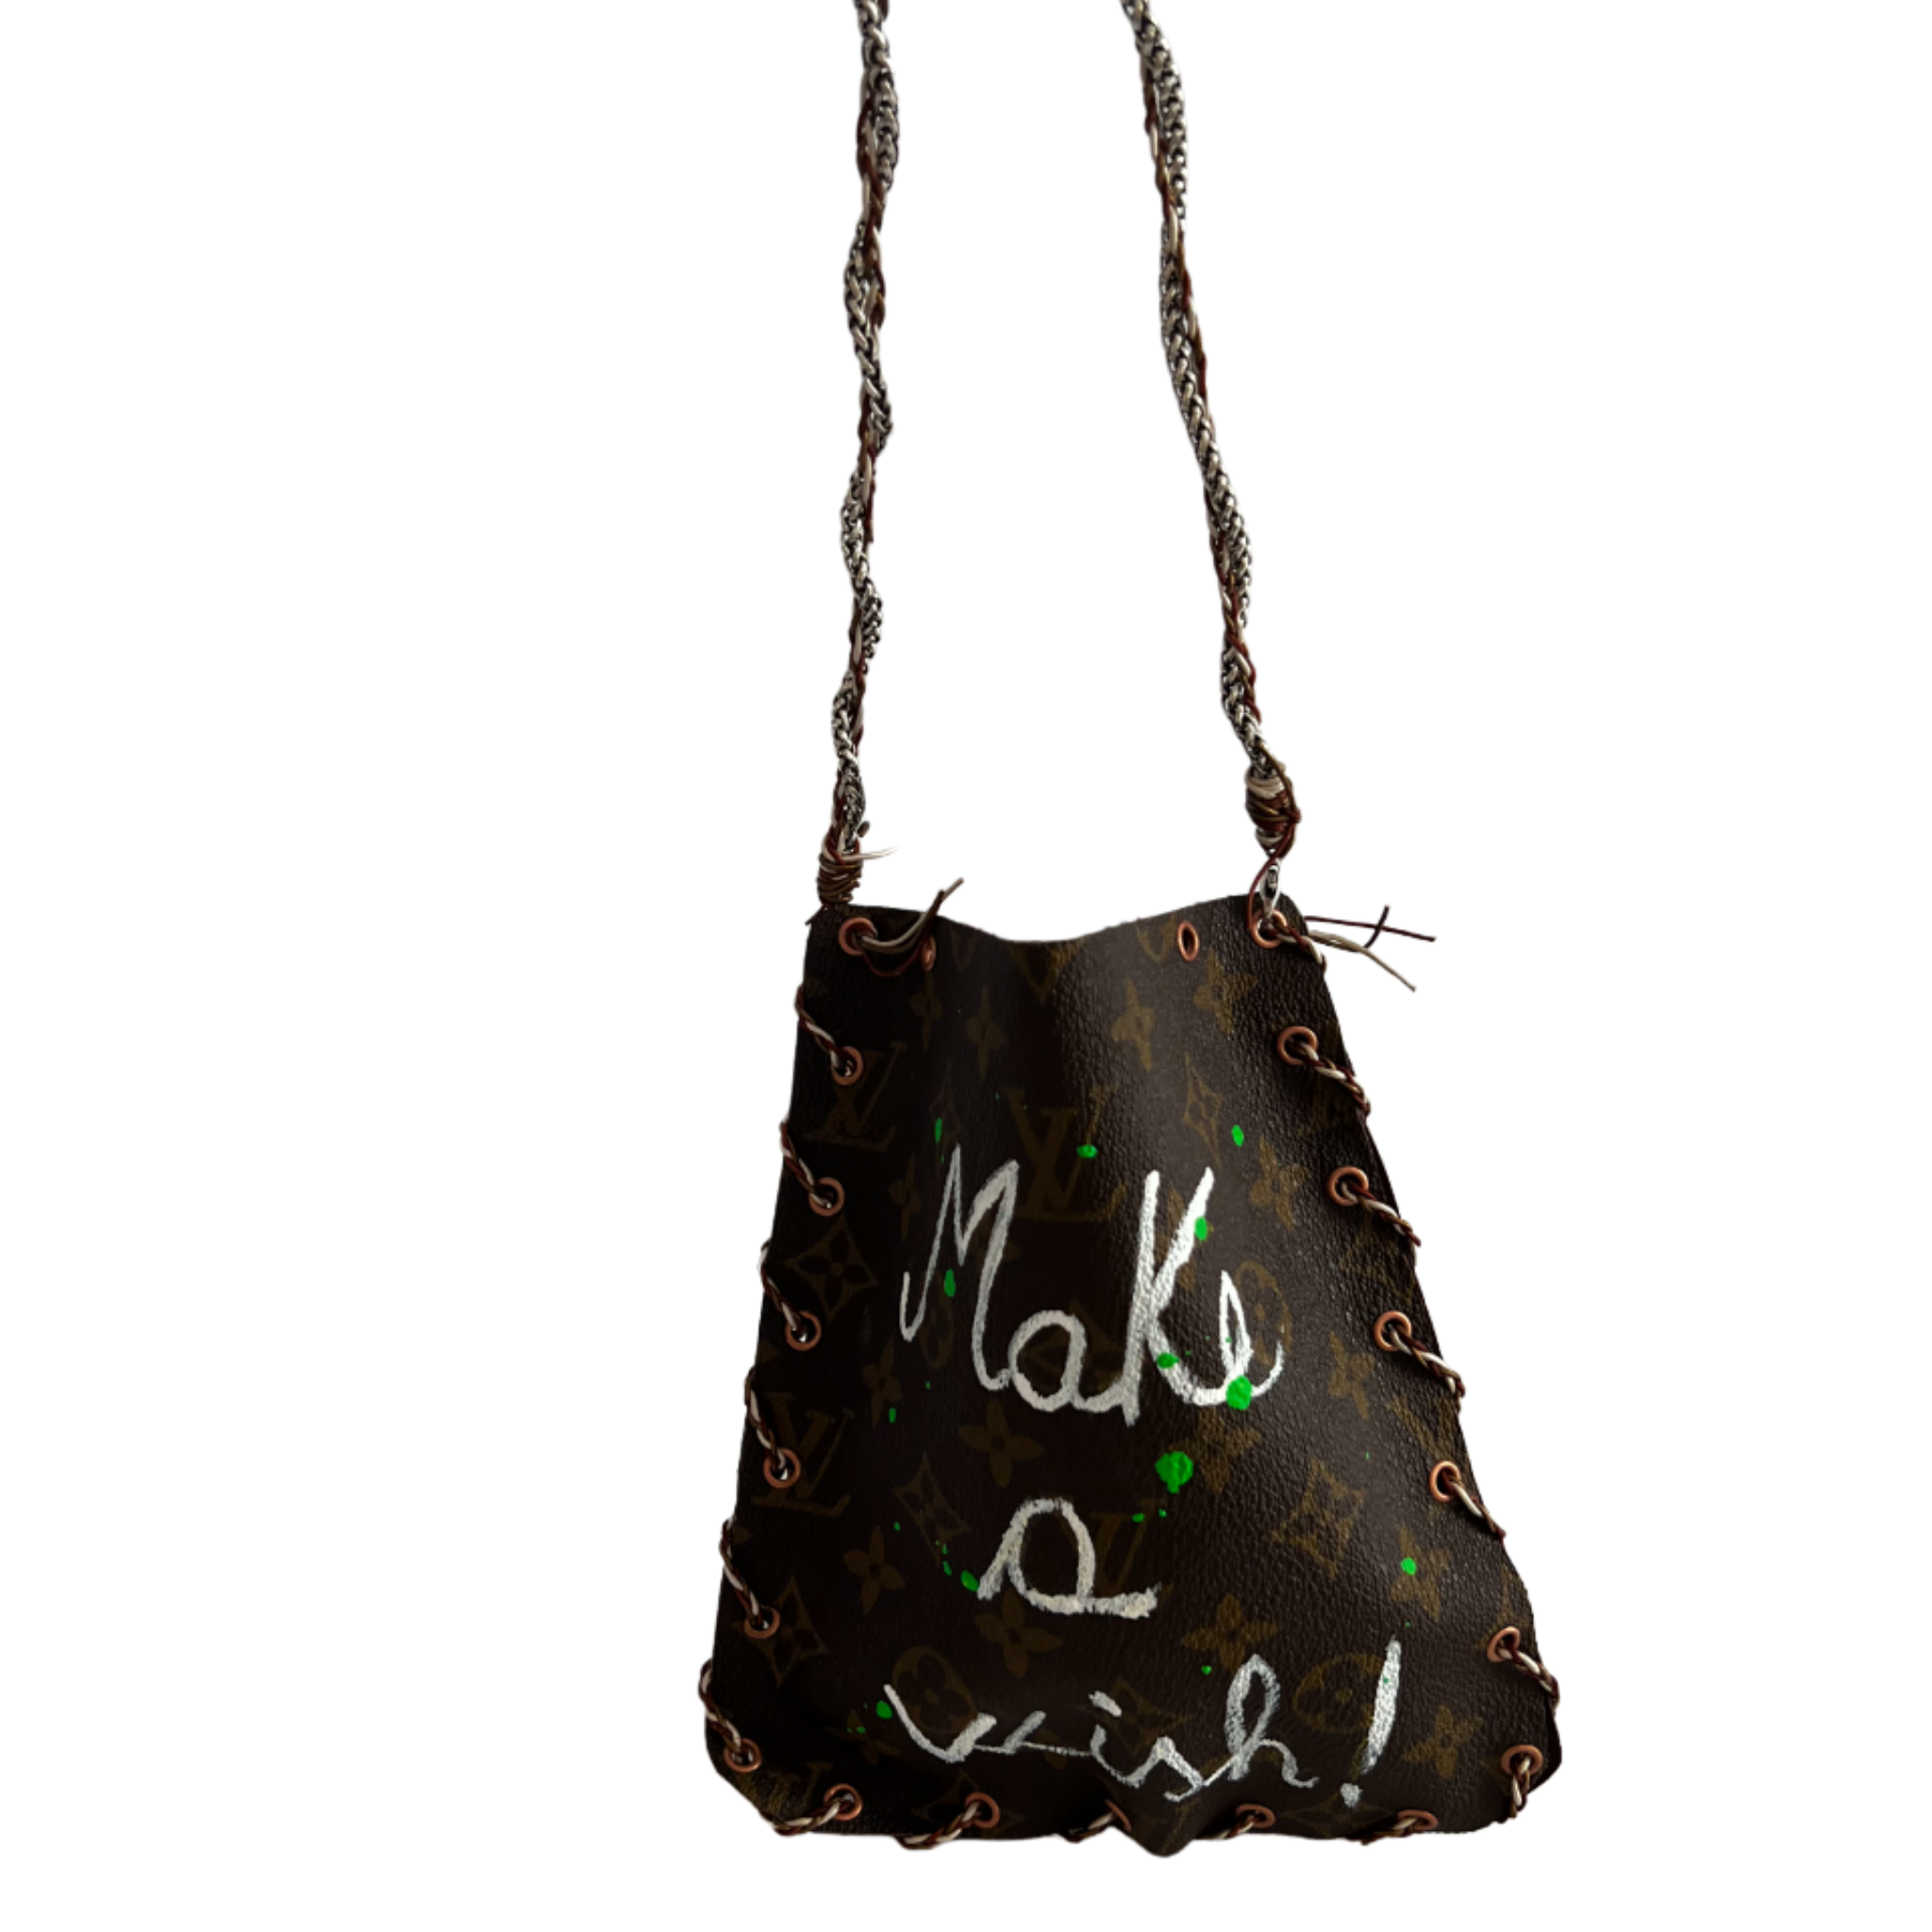 Make A Wish - Hand-Painted Remodeled LV Bag